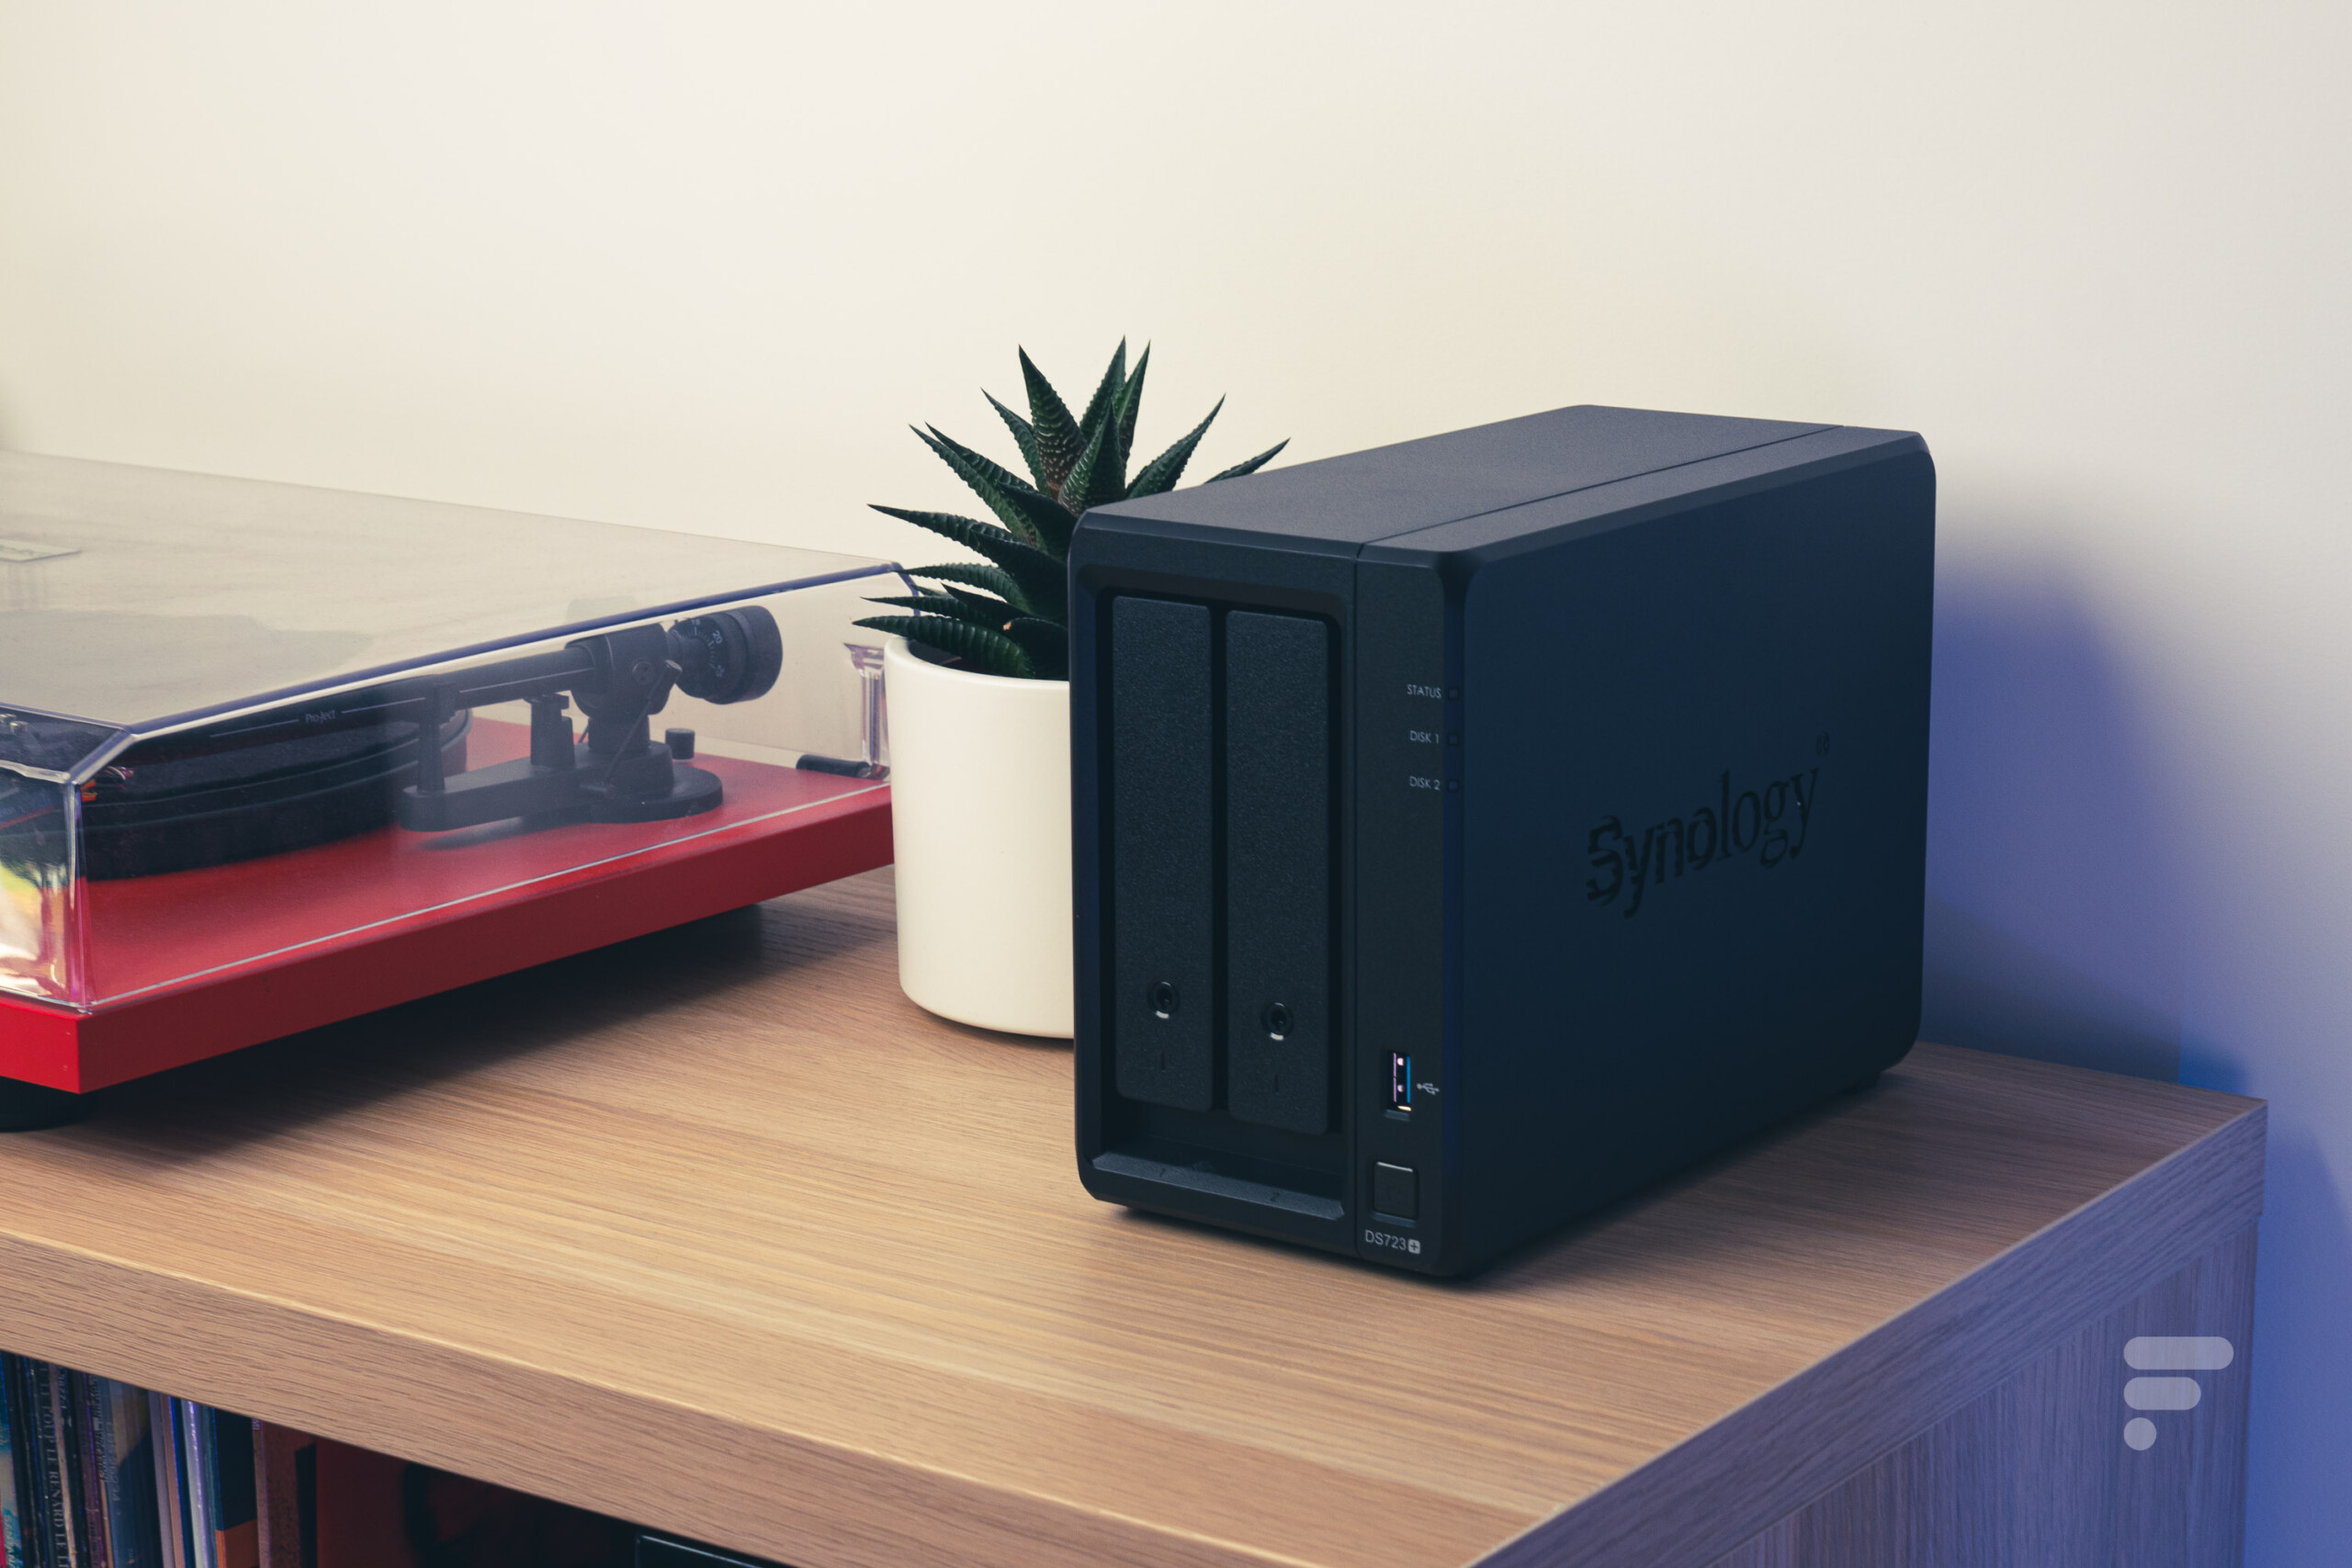 Serveur NAS Synology DiskStation DS720+ 2 baies